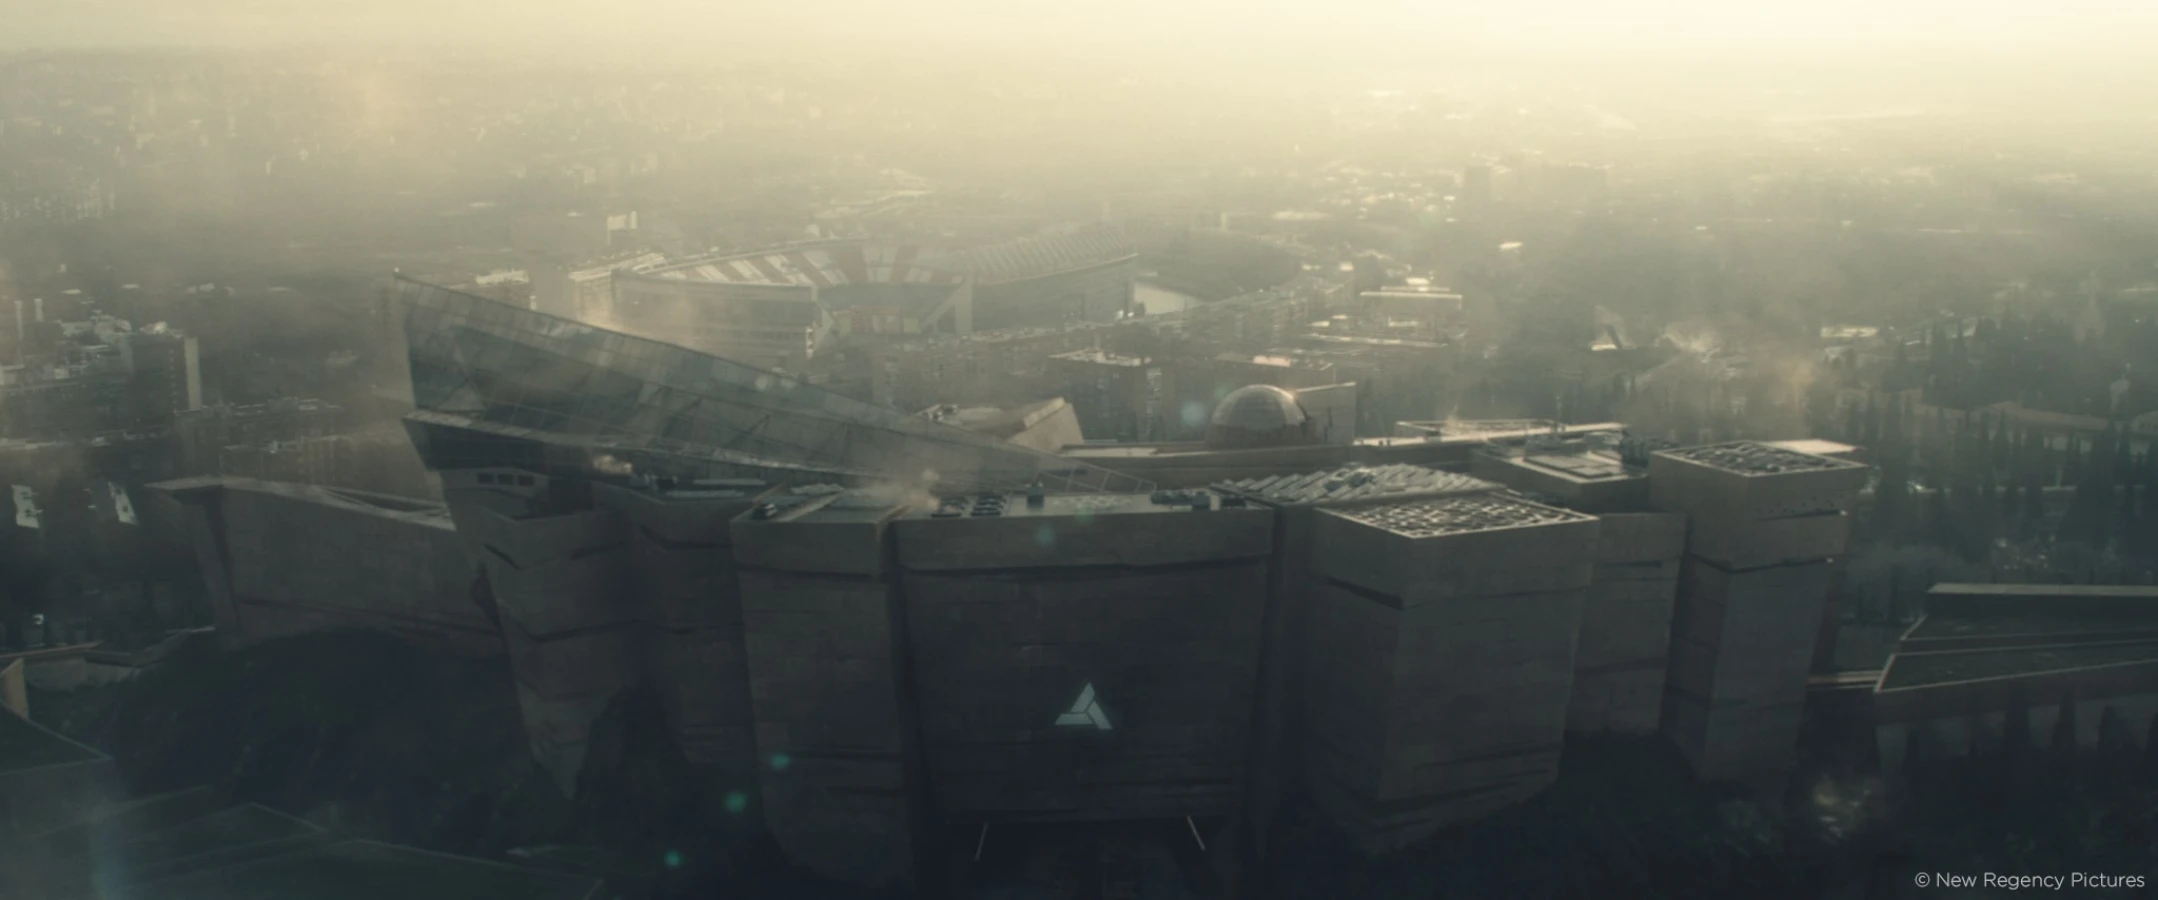  Assassins's Creed shot view city with smog Raynault vfx 